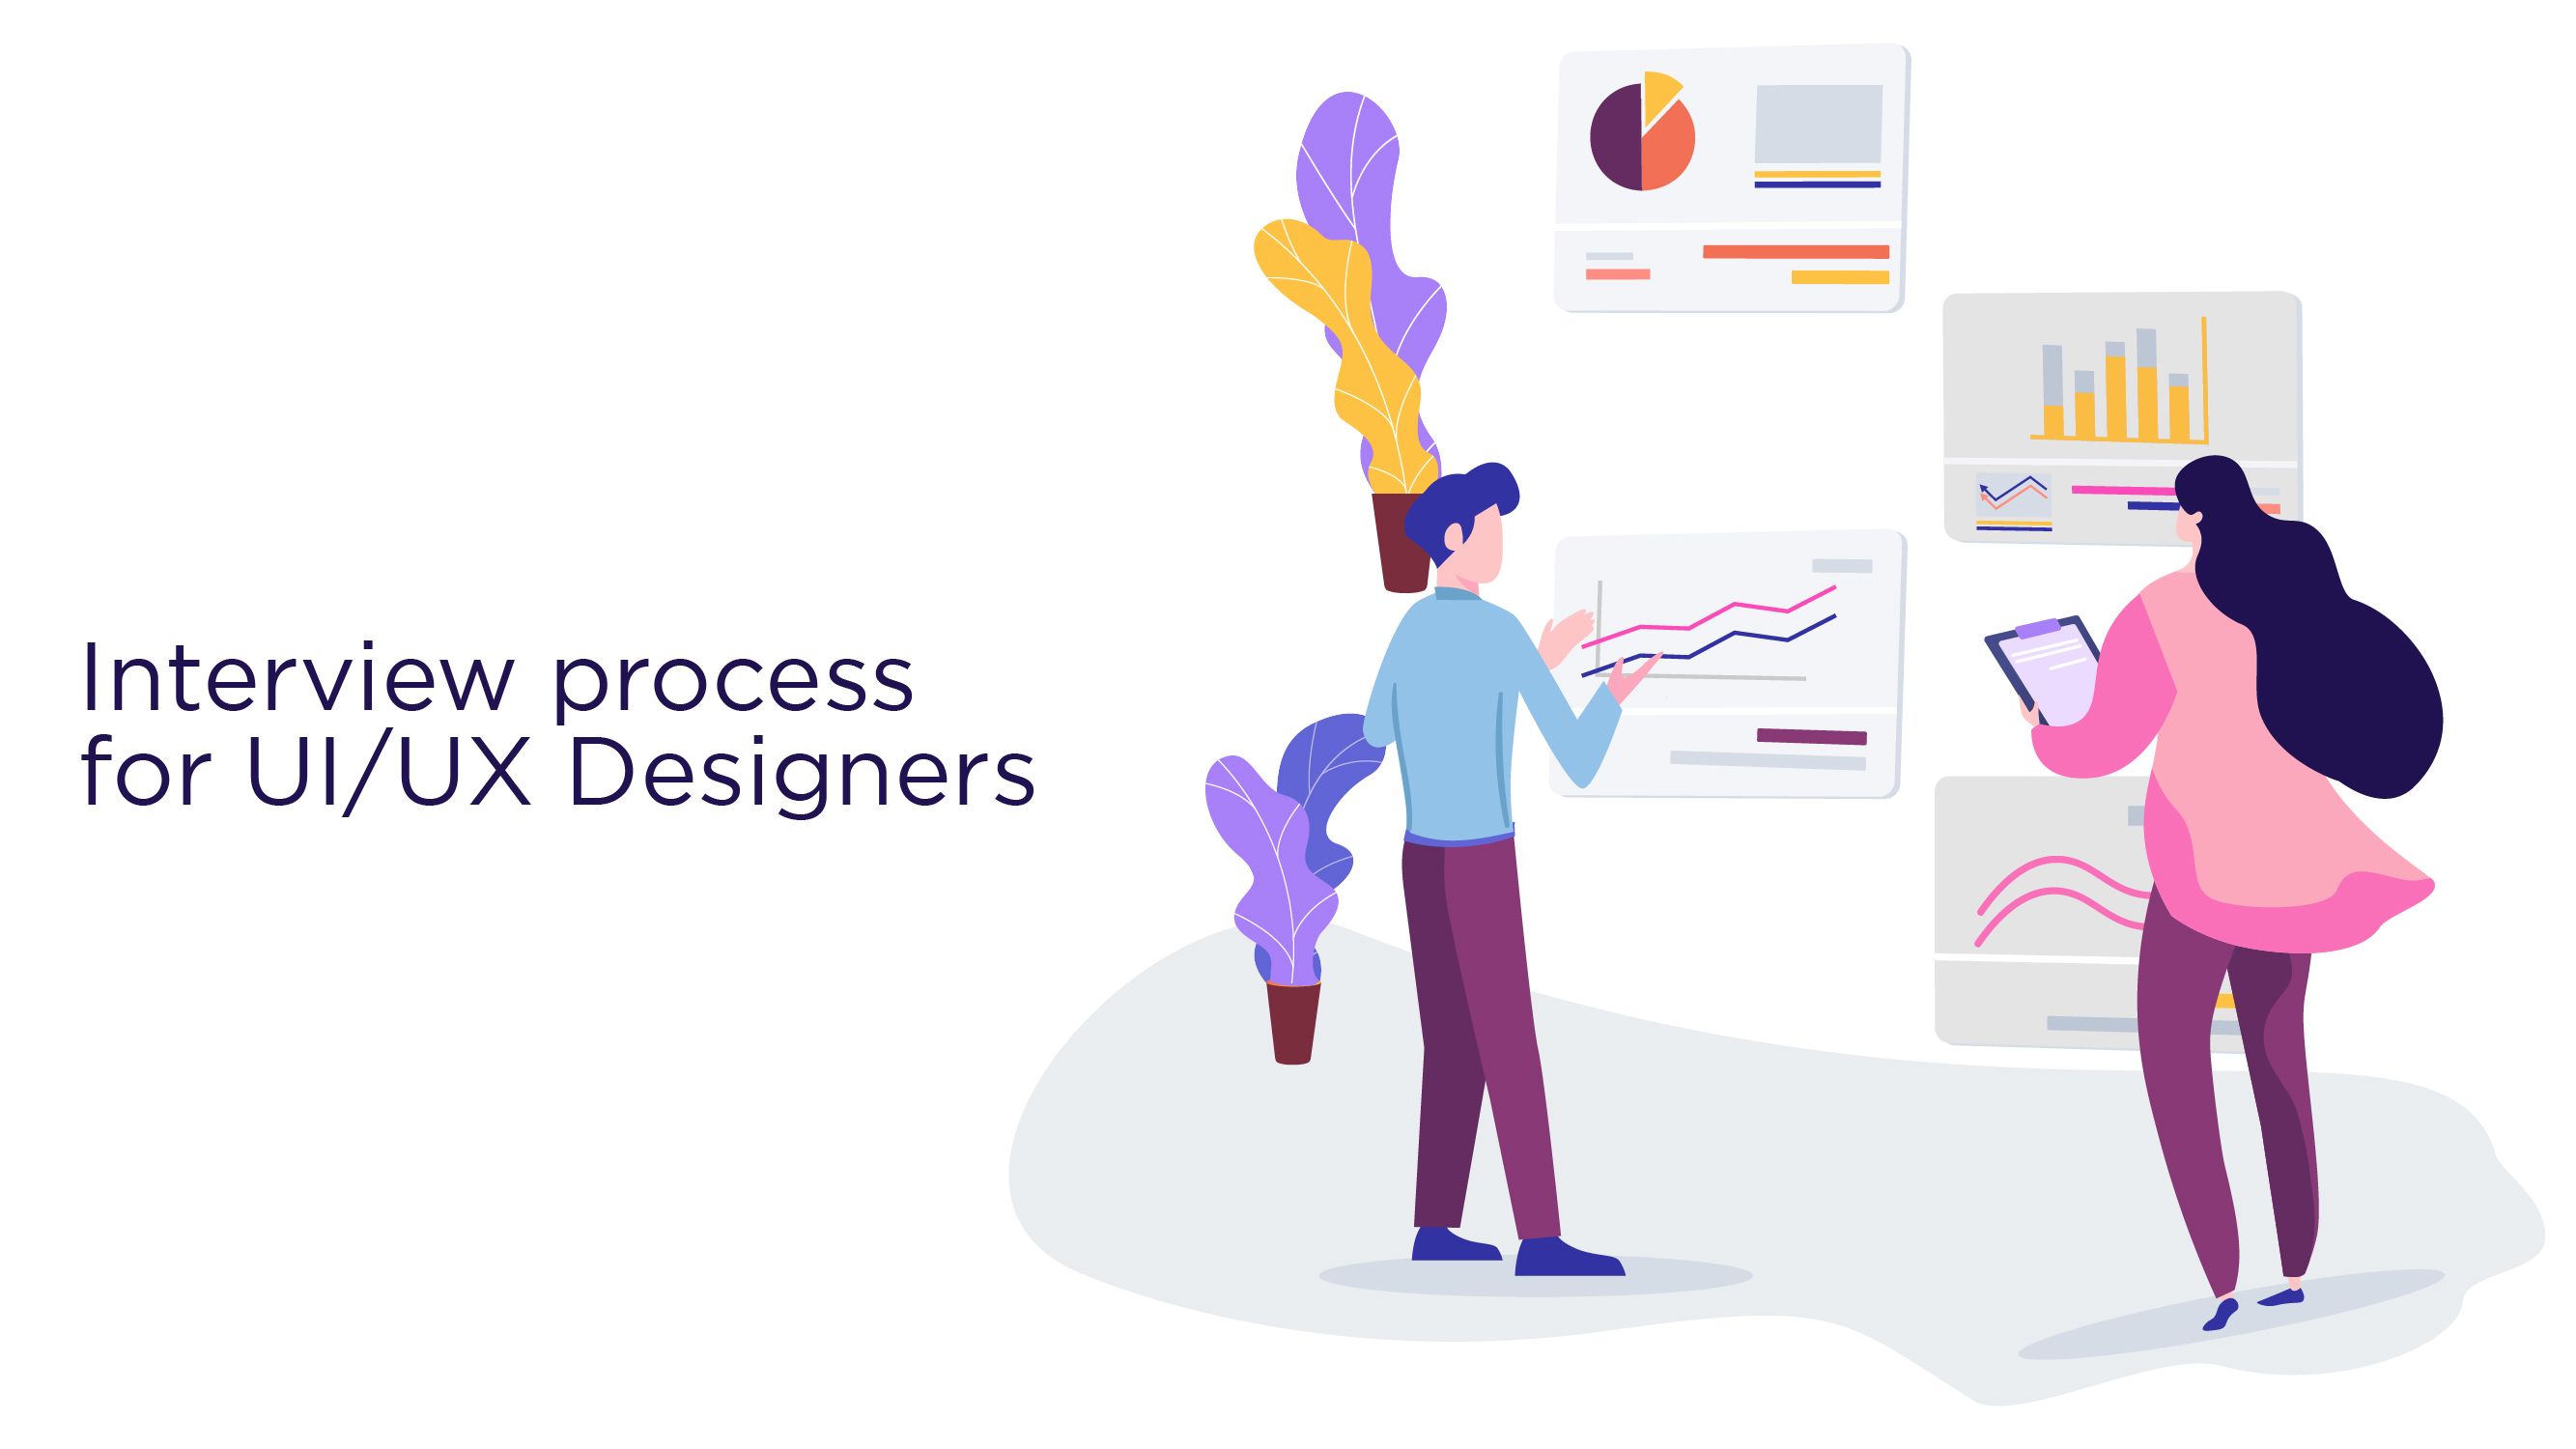 The interview process in the hiring guide for UI/UX Designers